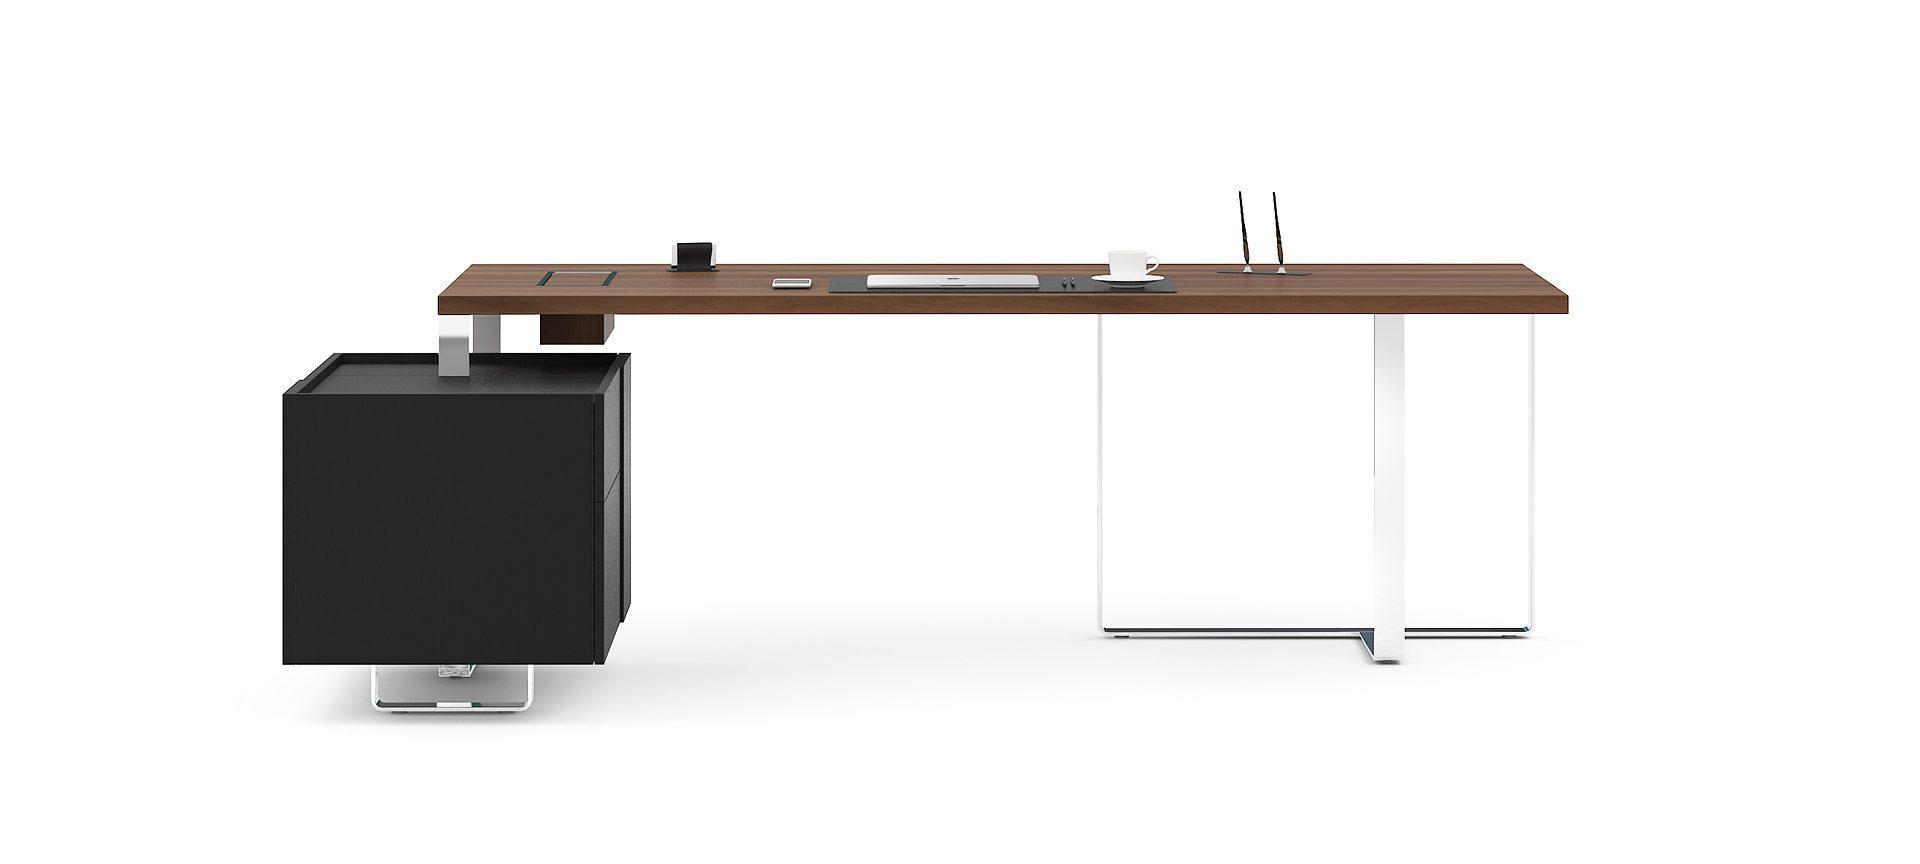 Home office tables